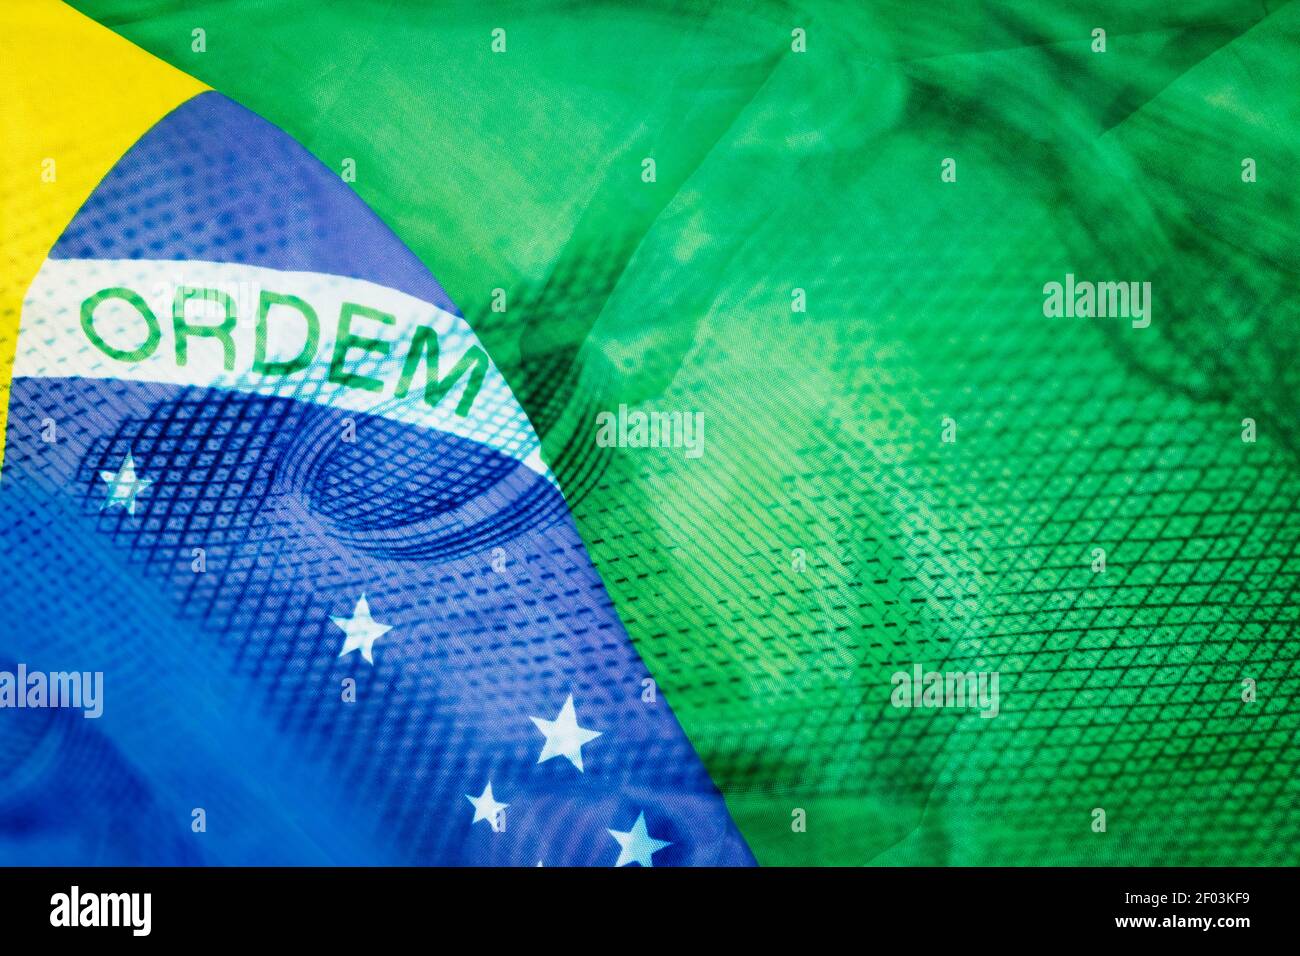 Brazilian money called Real and flag of Brazil image concept Stock Photo